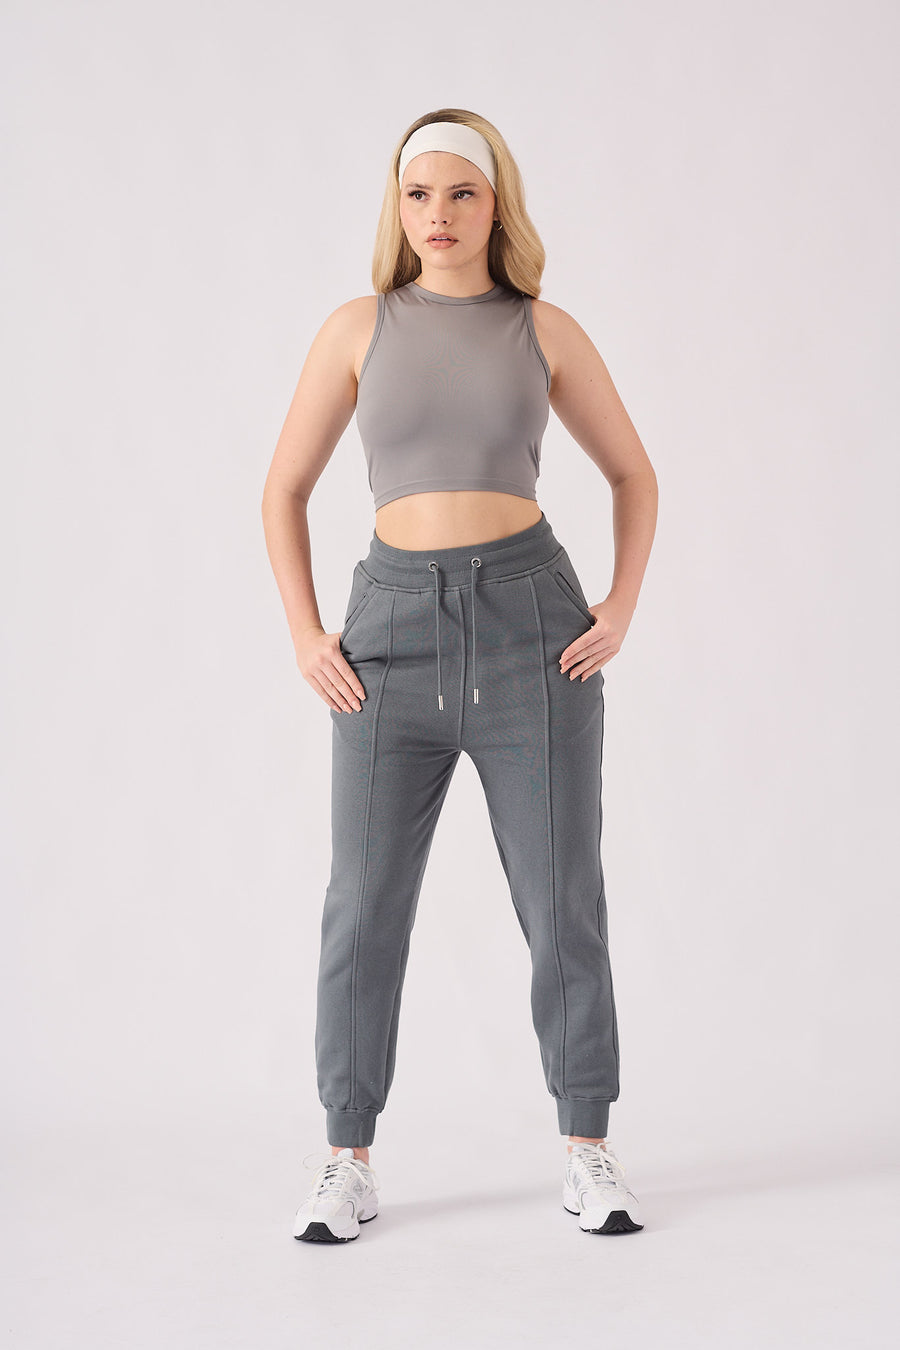 TAPERED JOGGERS - GREY